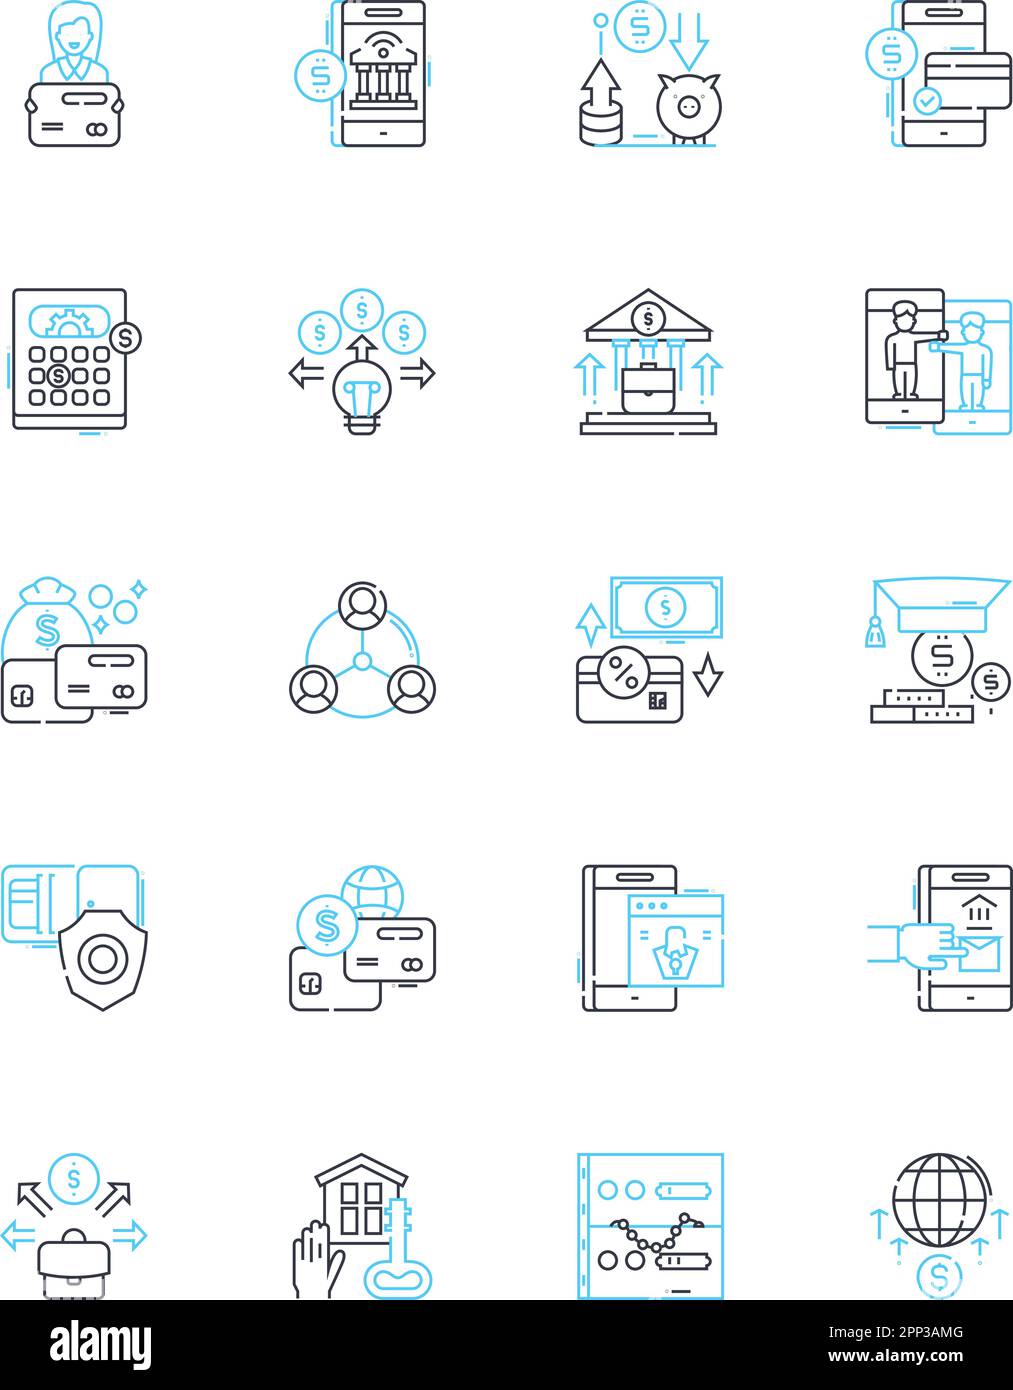 Peer-to-peer lending linear icons set. Lending, Peer, Finance, Investment, Borrower, Loan, Interest line vector and concept signs. Collateral,Credit Stock Vector